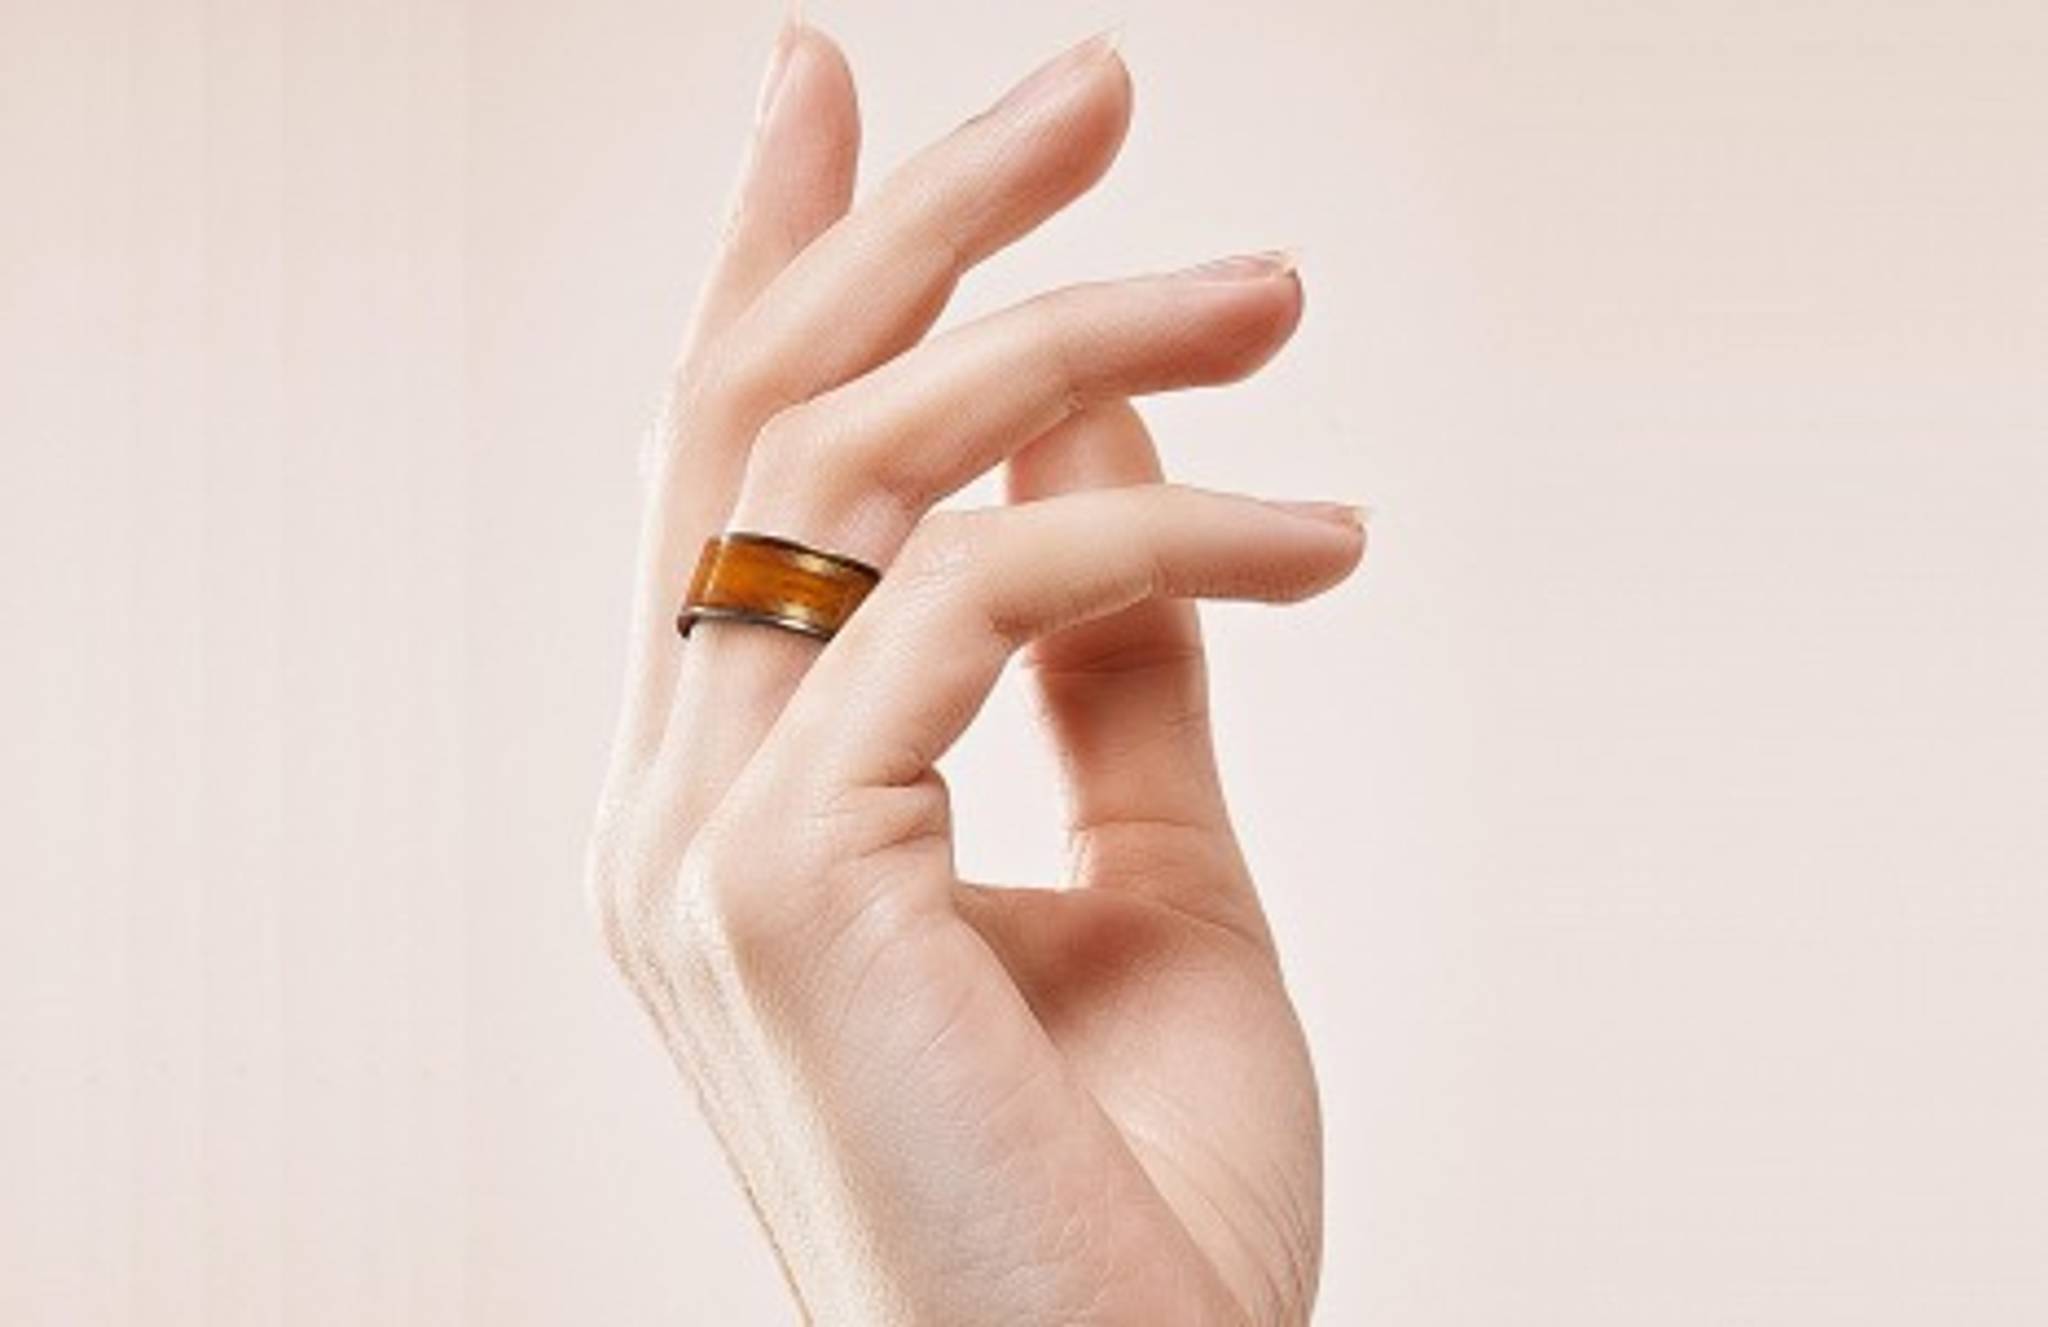 NFC ring: unobtrusive wearable tech?